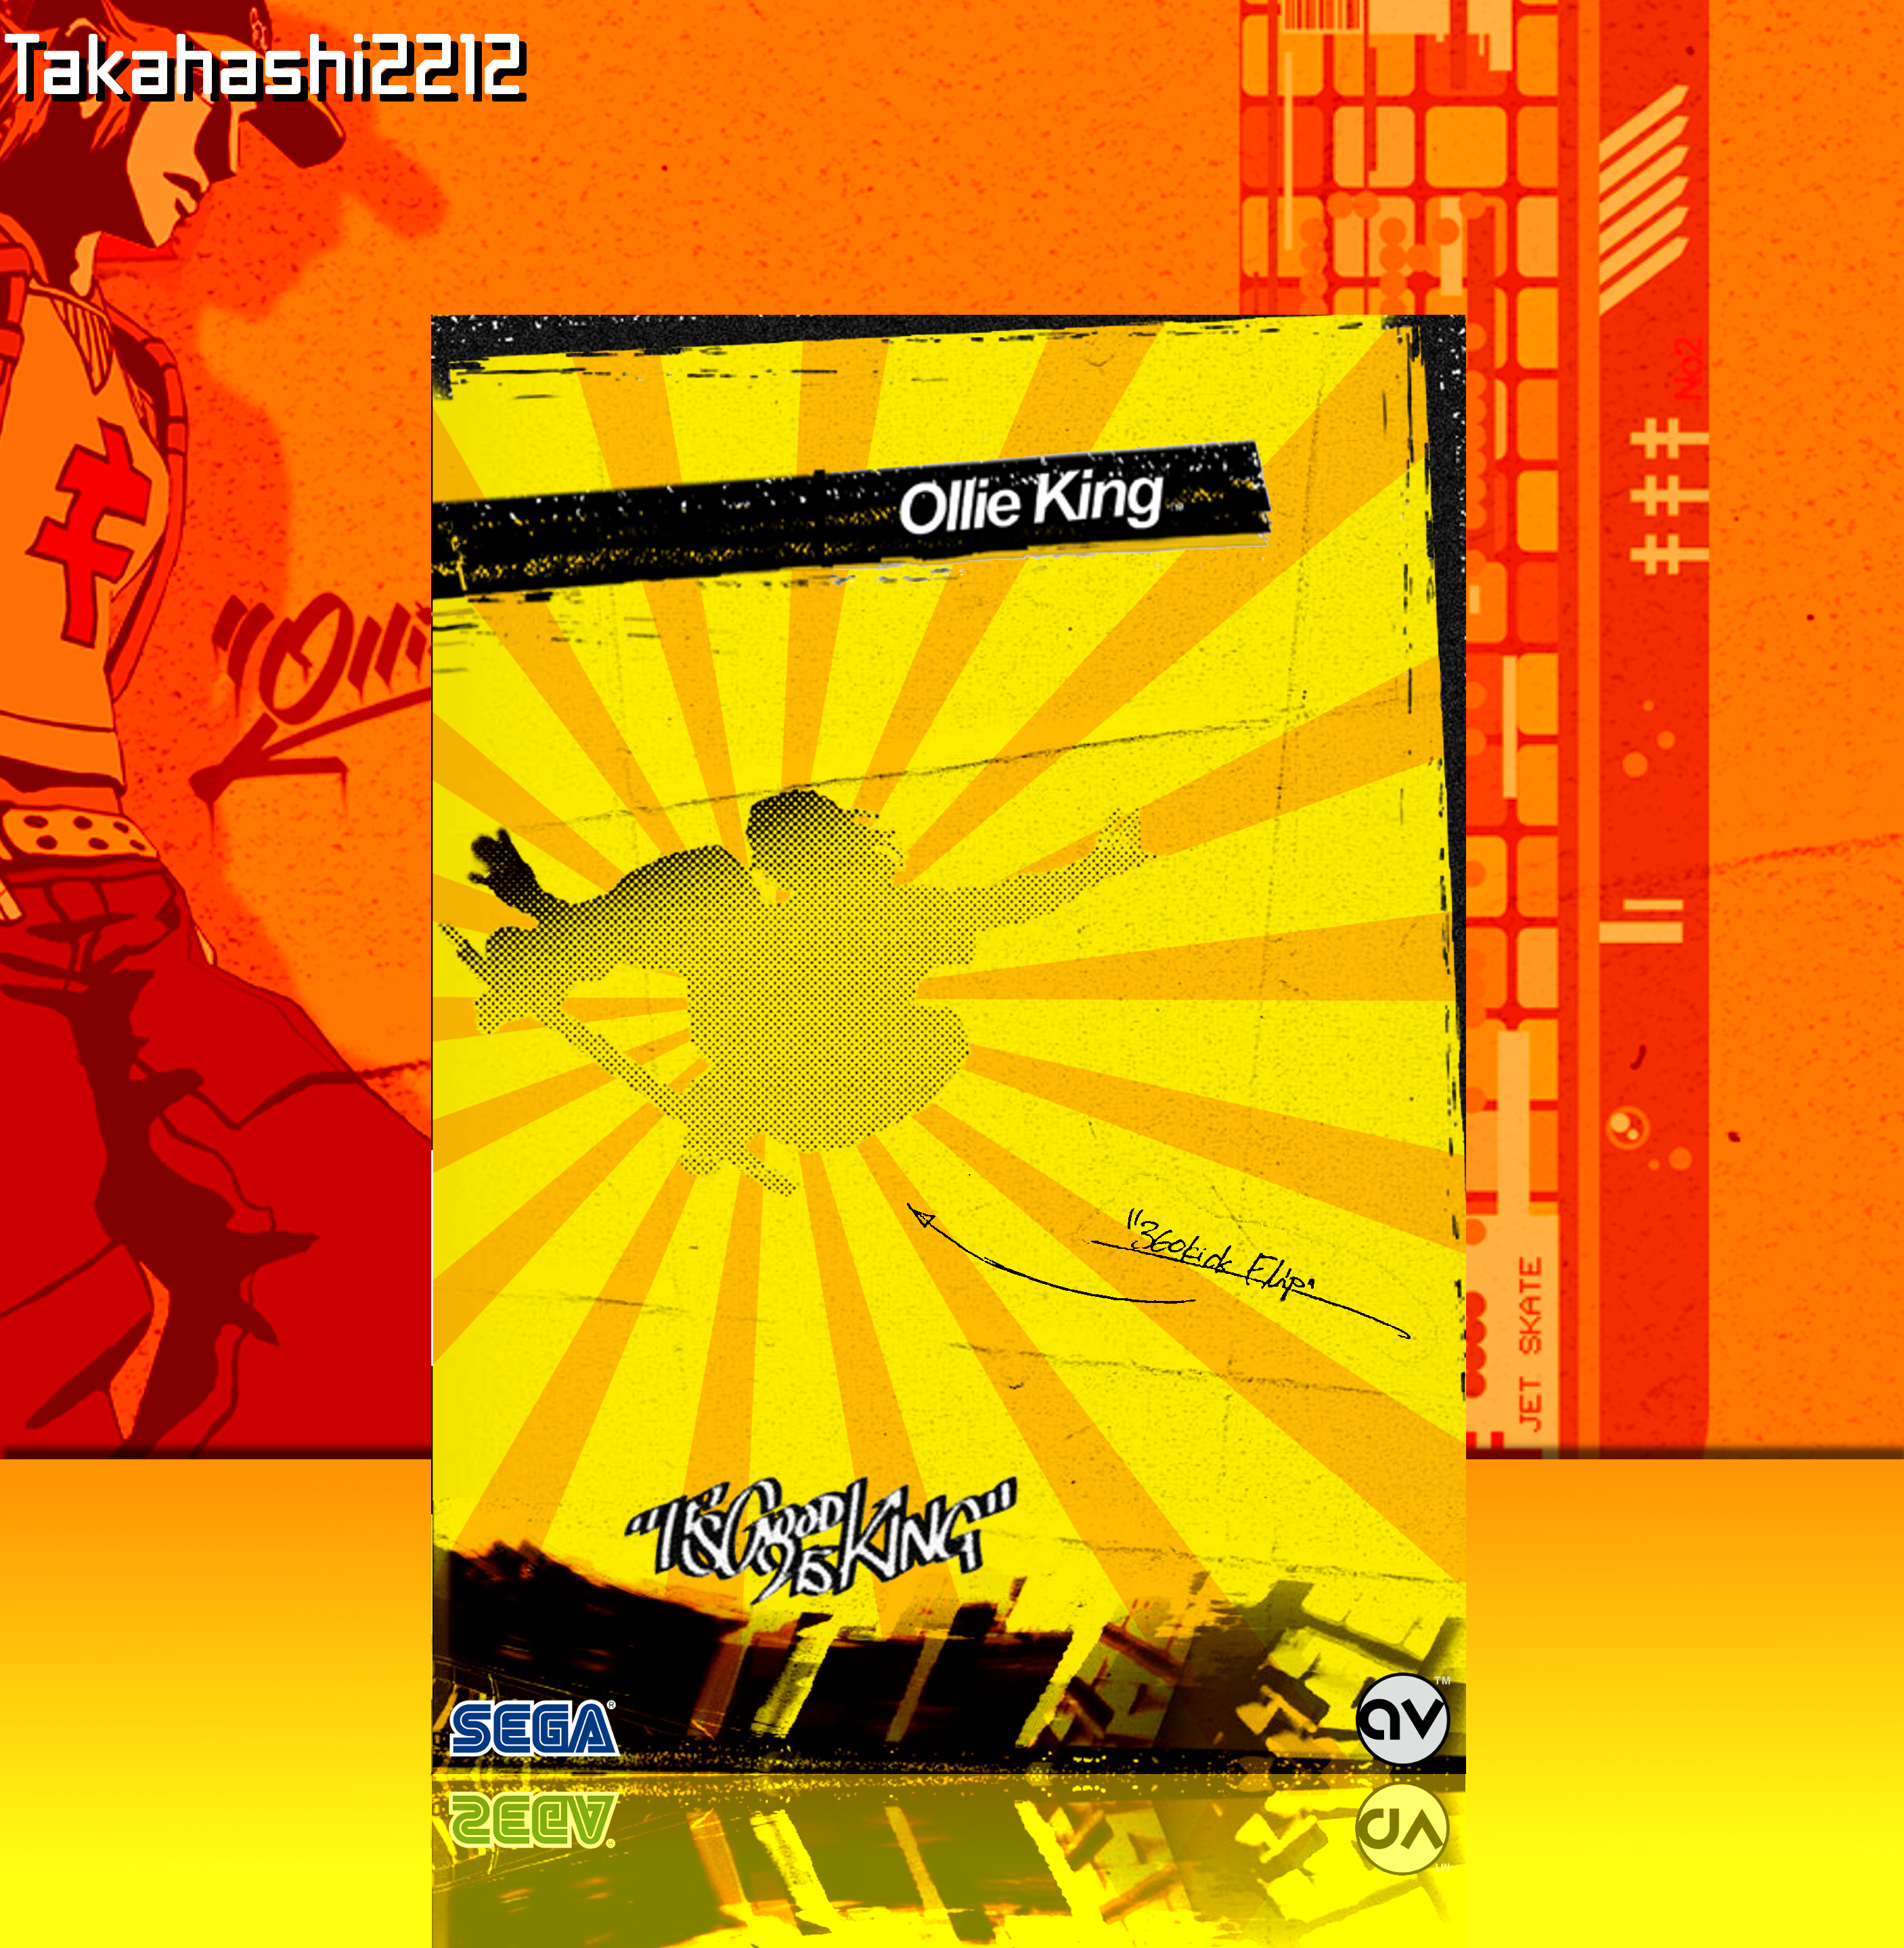 Ollie King box cover